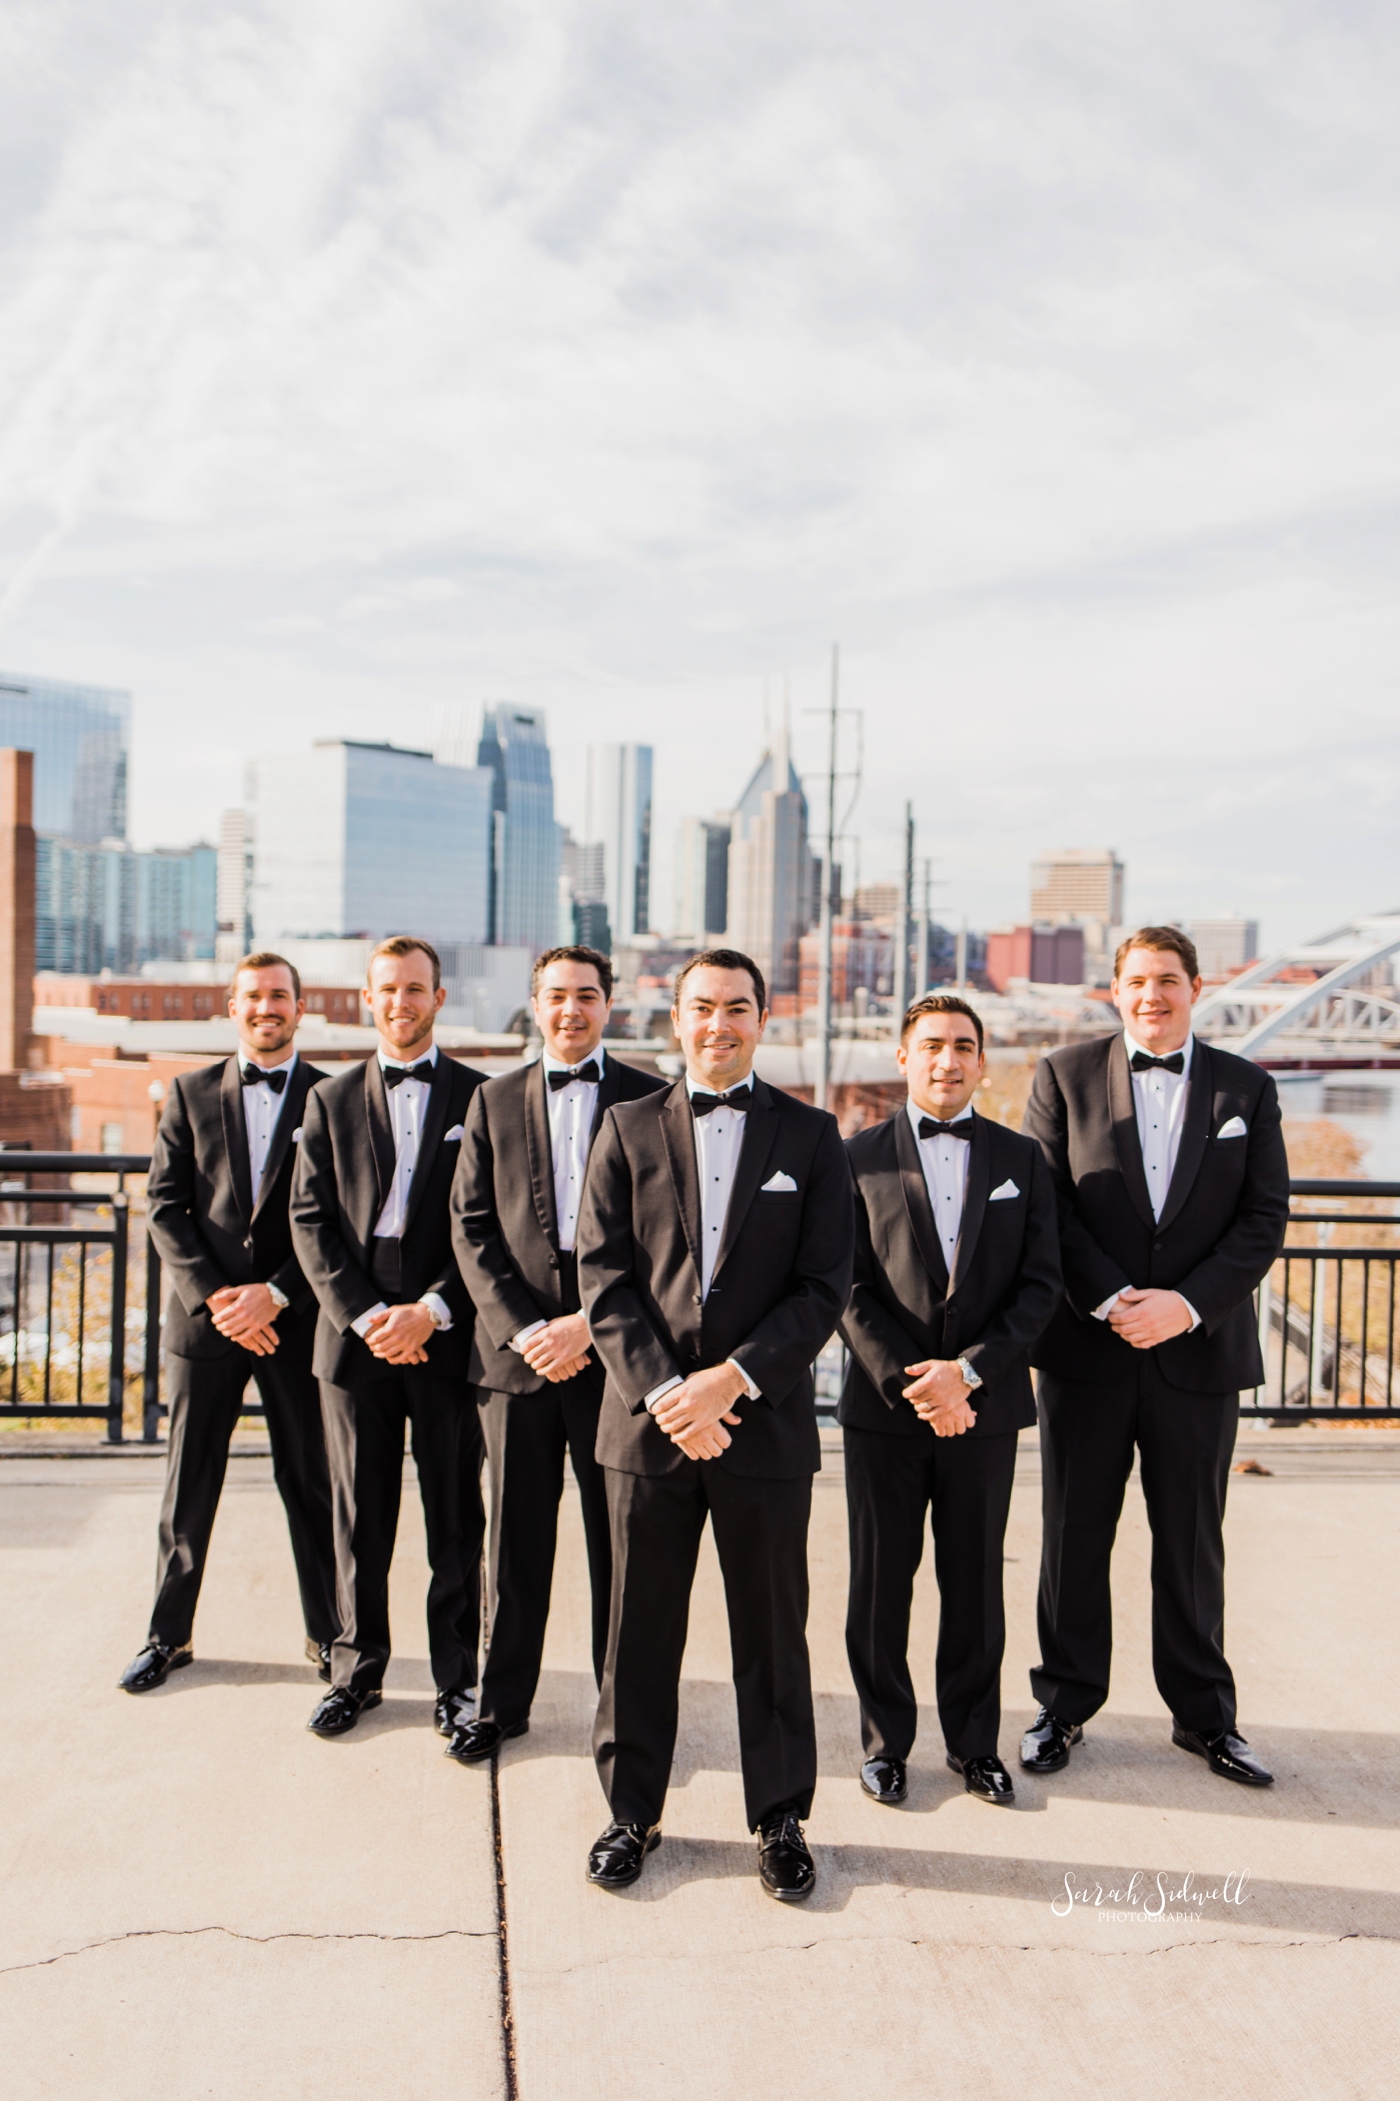 Groomsmen stand together | Sarah Sidwell Photography | The Bell Tower